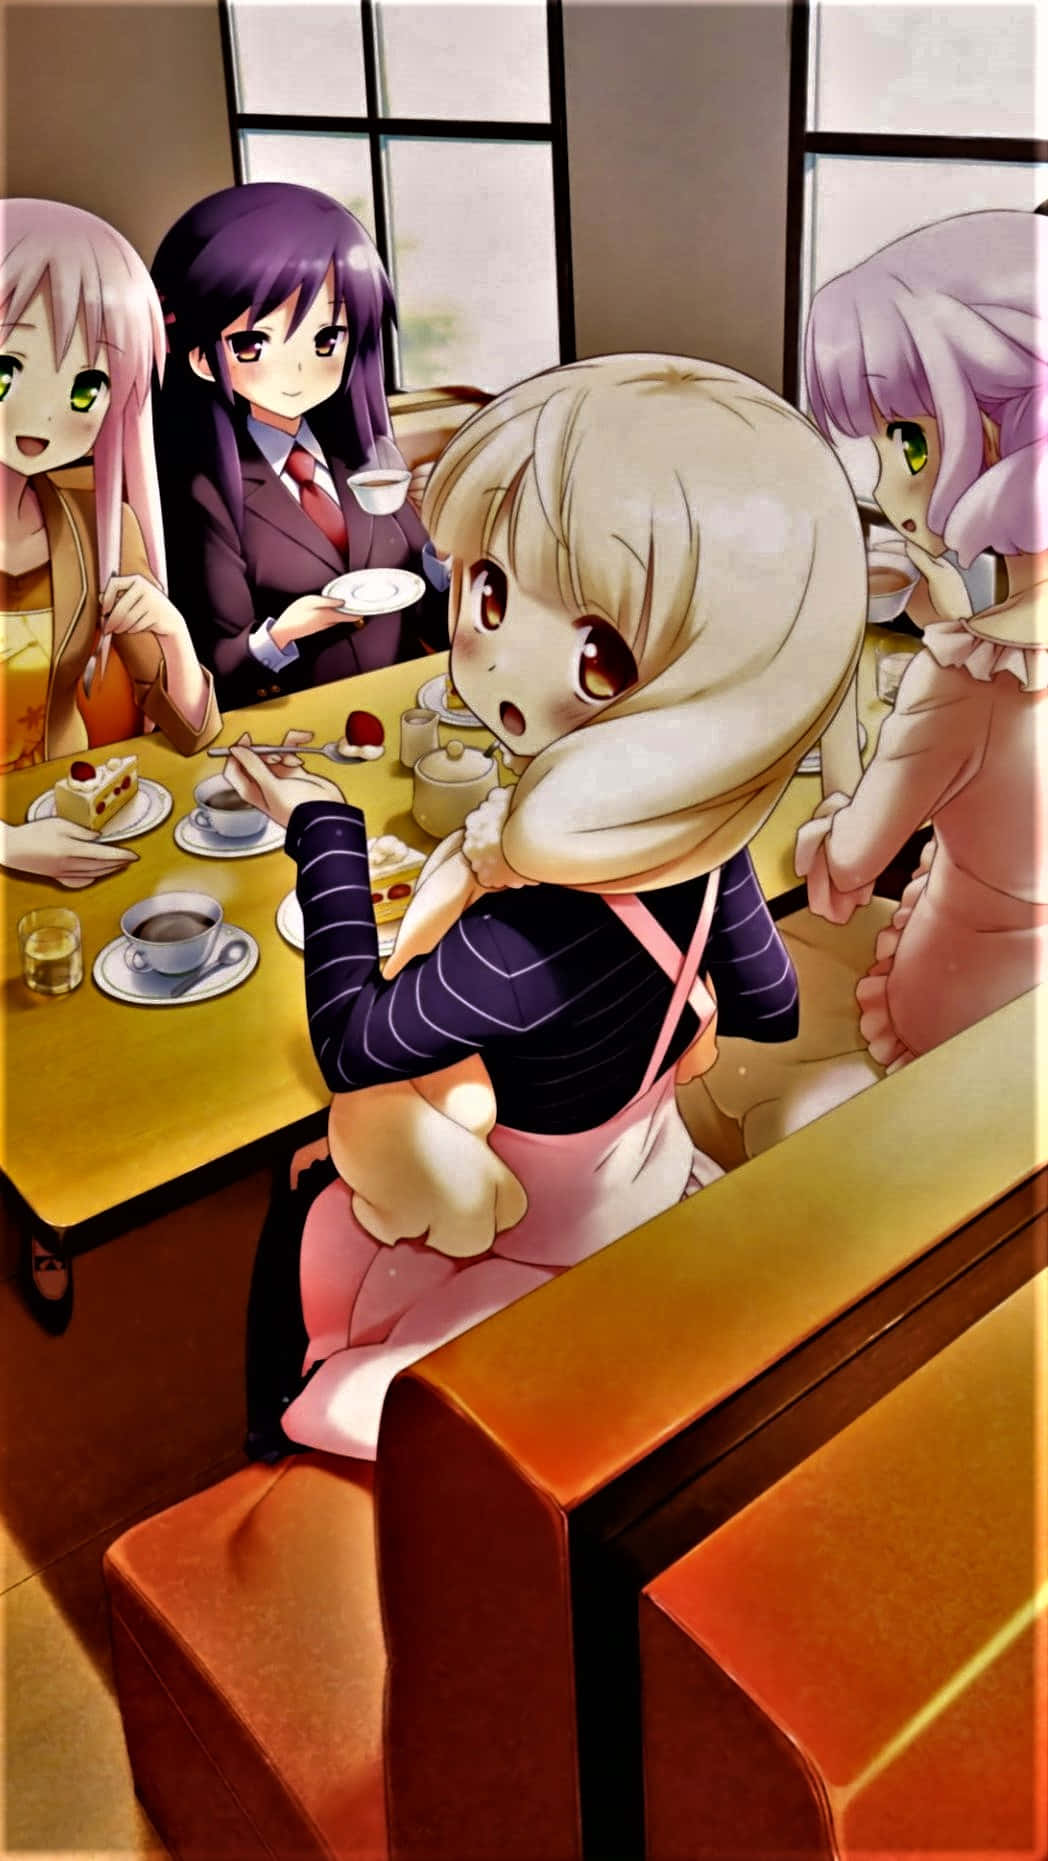 Come to Anime Cafe for the best in anime culture and delicious eats!